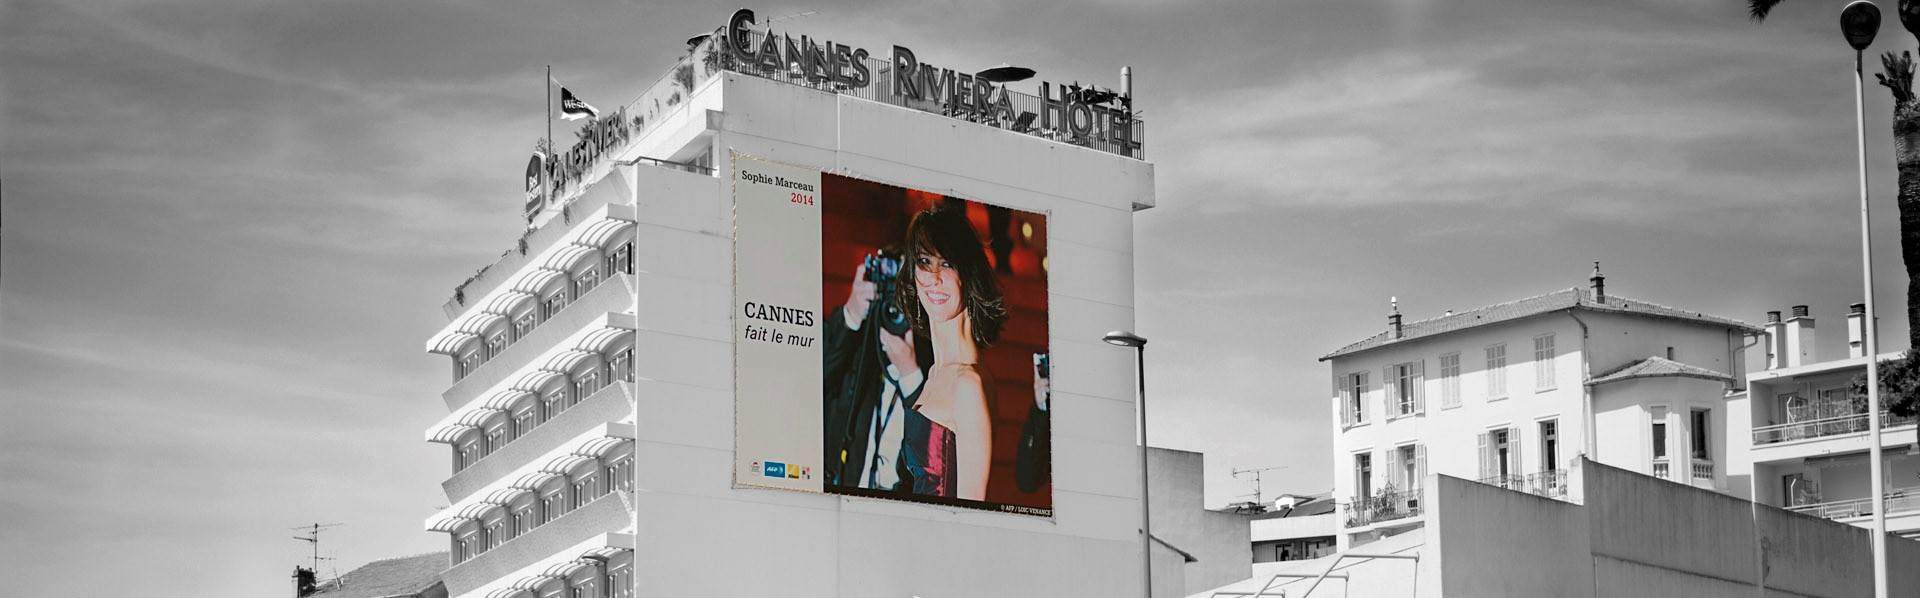 cannes festival affichage rues